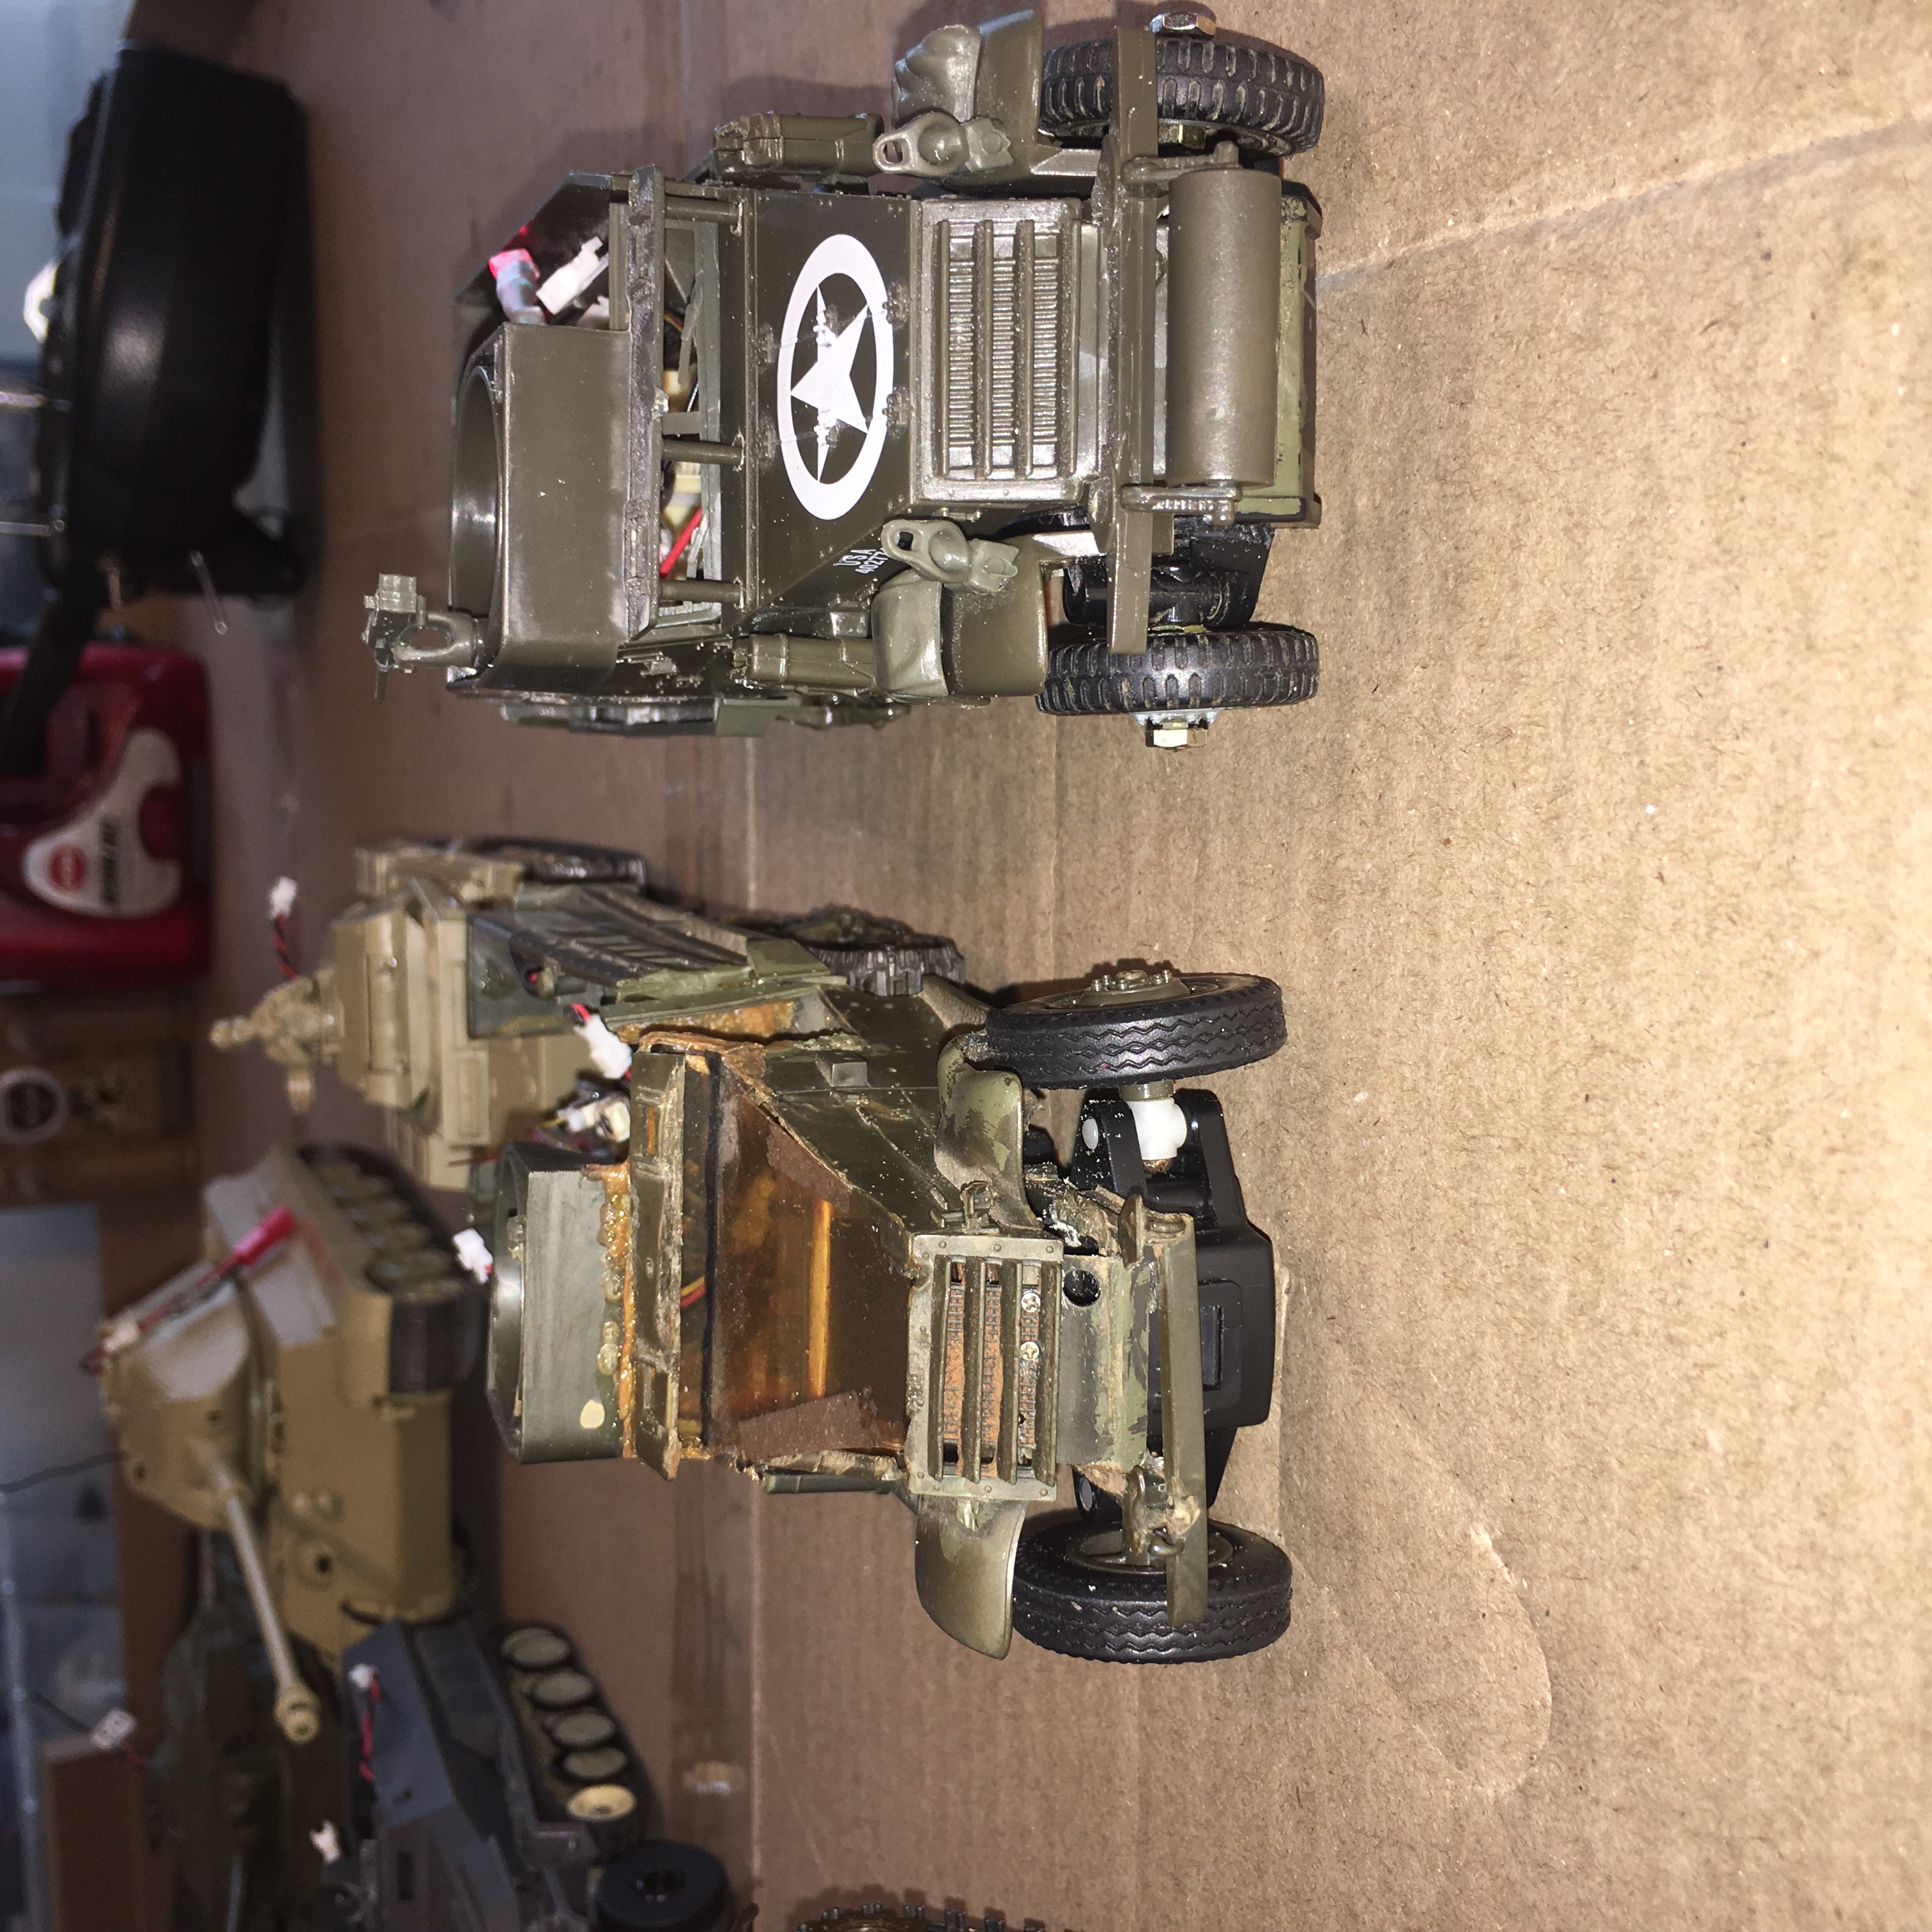 Model on the Left is a Tamiya M2A1, Model on the Right is a Testors M2A1 Half track. Looks like the Tamiya needs a wheel alignment.